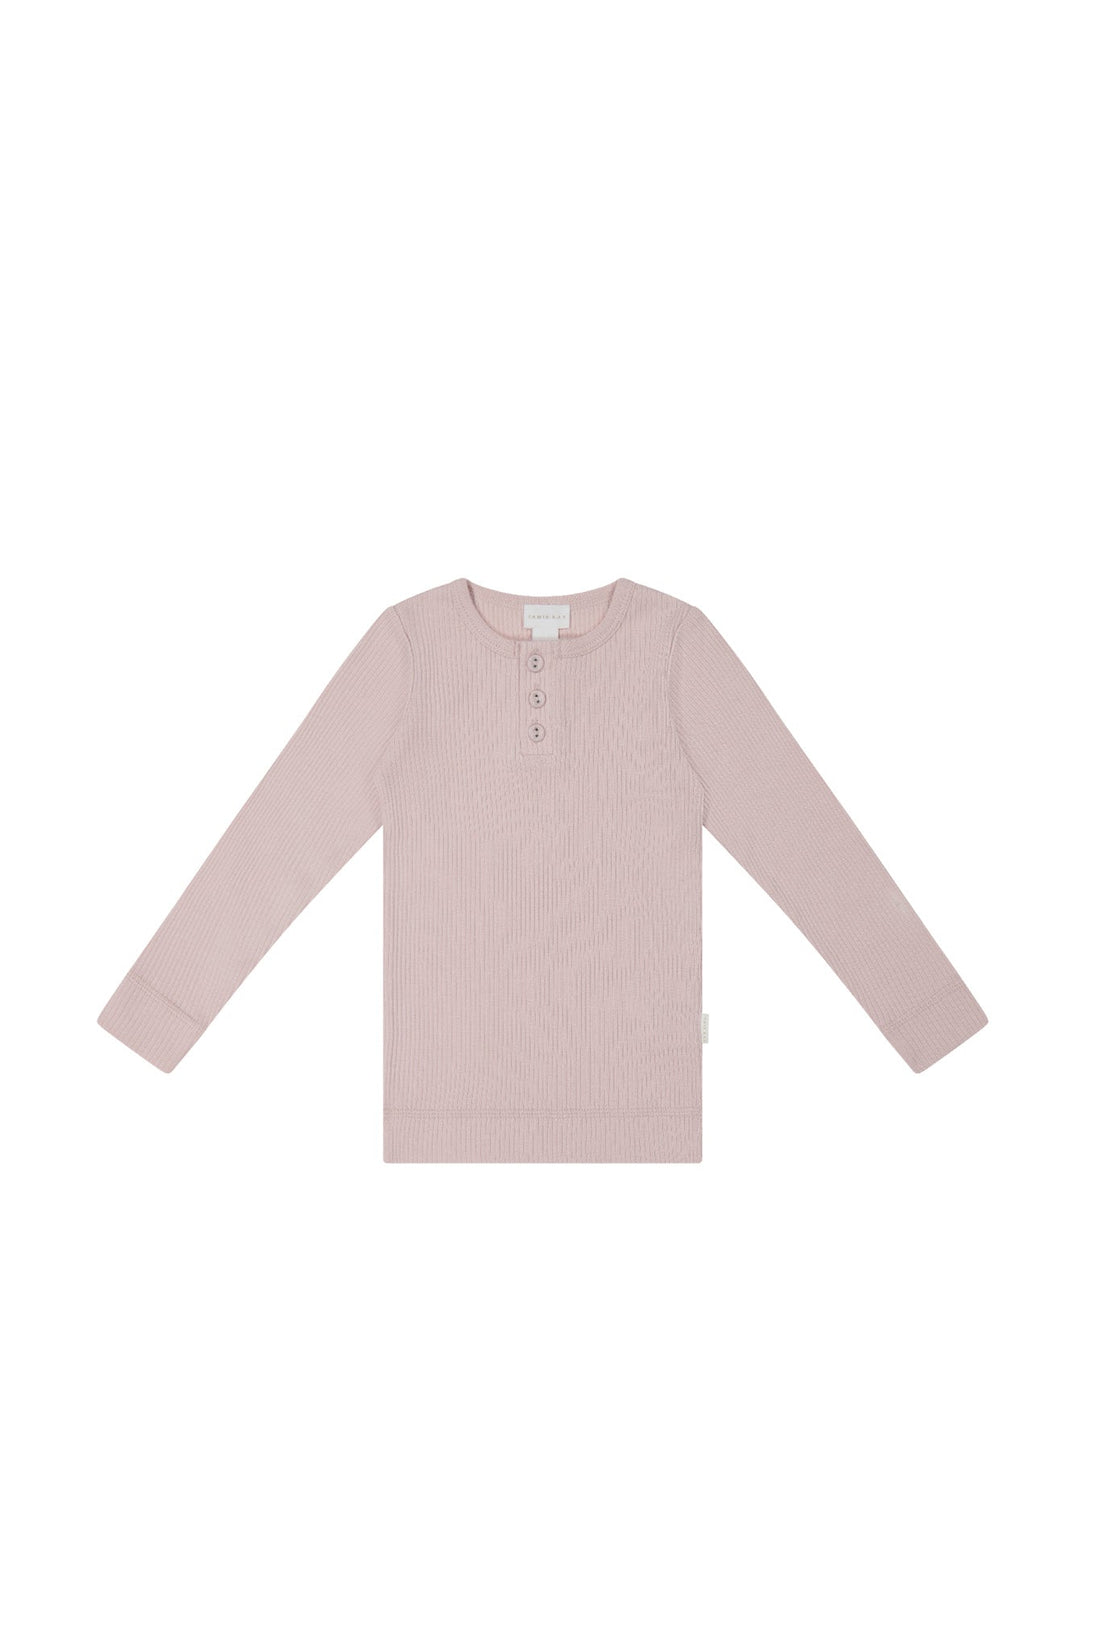 Organic Cotton Modal Long Sleeve Henley - Old Rose Childrens Top from Jamie Kay USA